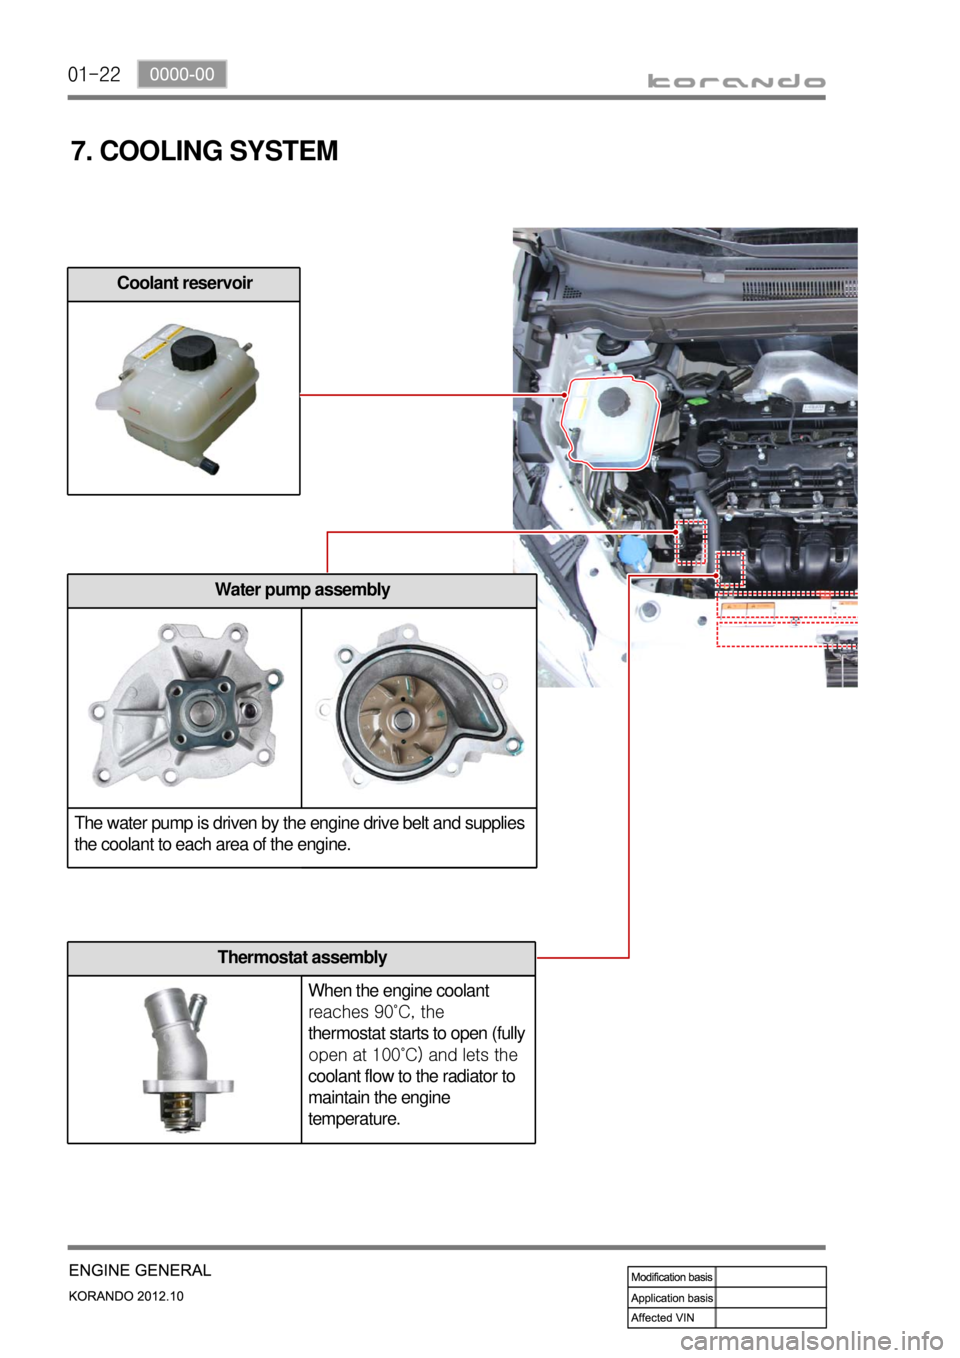 SSANGYONG KORANDO 2012  Service Manual 01-22
7. COOLING SYSTEM
Coolant reservoir
Water pump assembly
The water pump is driven by the engine drive belt and supplies 
the coolant to each area of the engine.
Thermostat assembly
When the engin